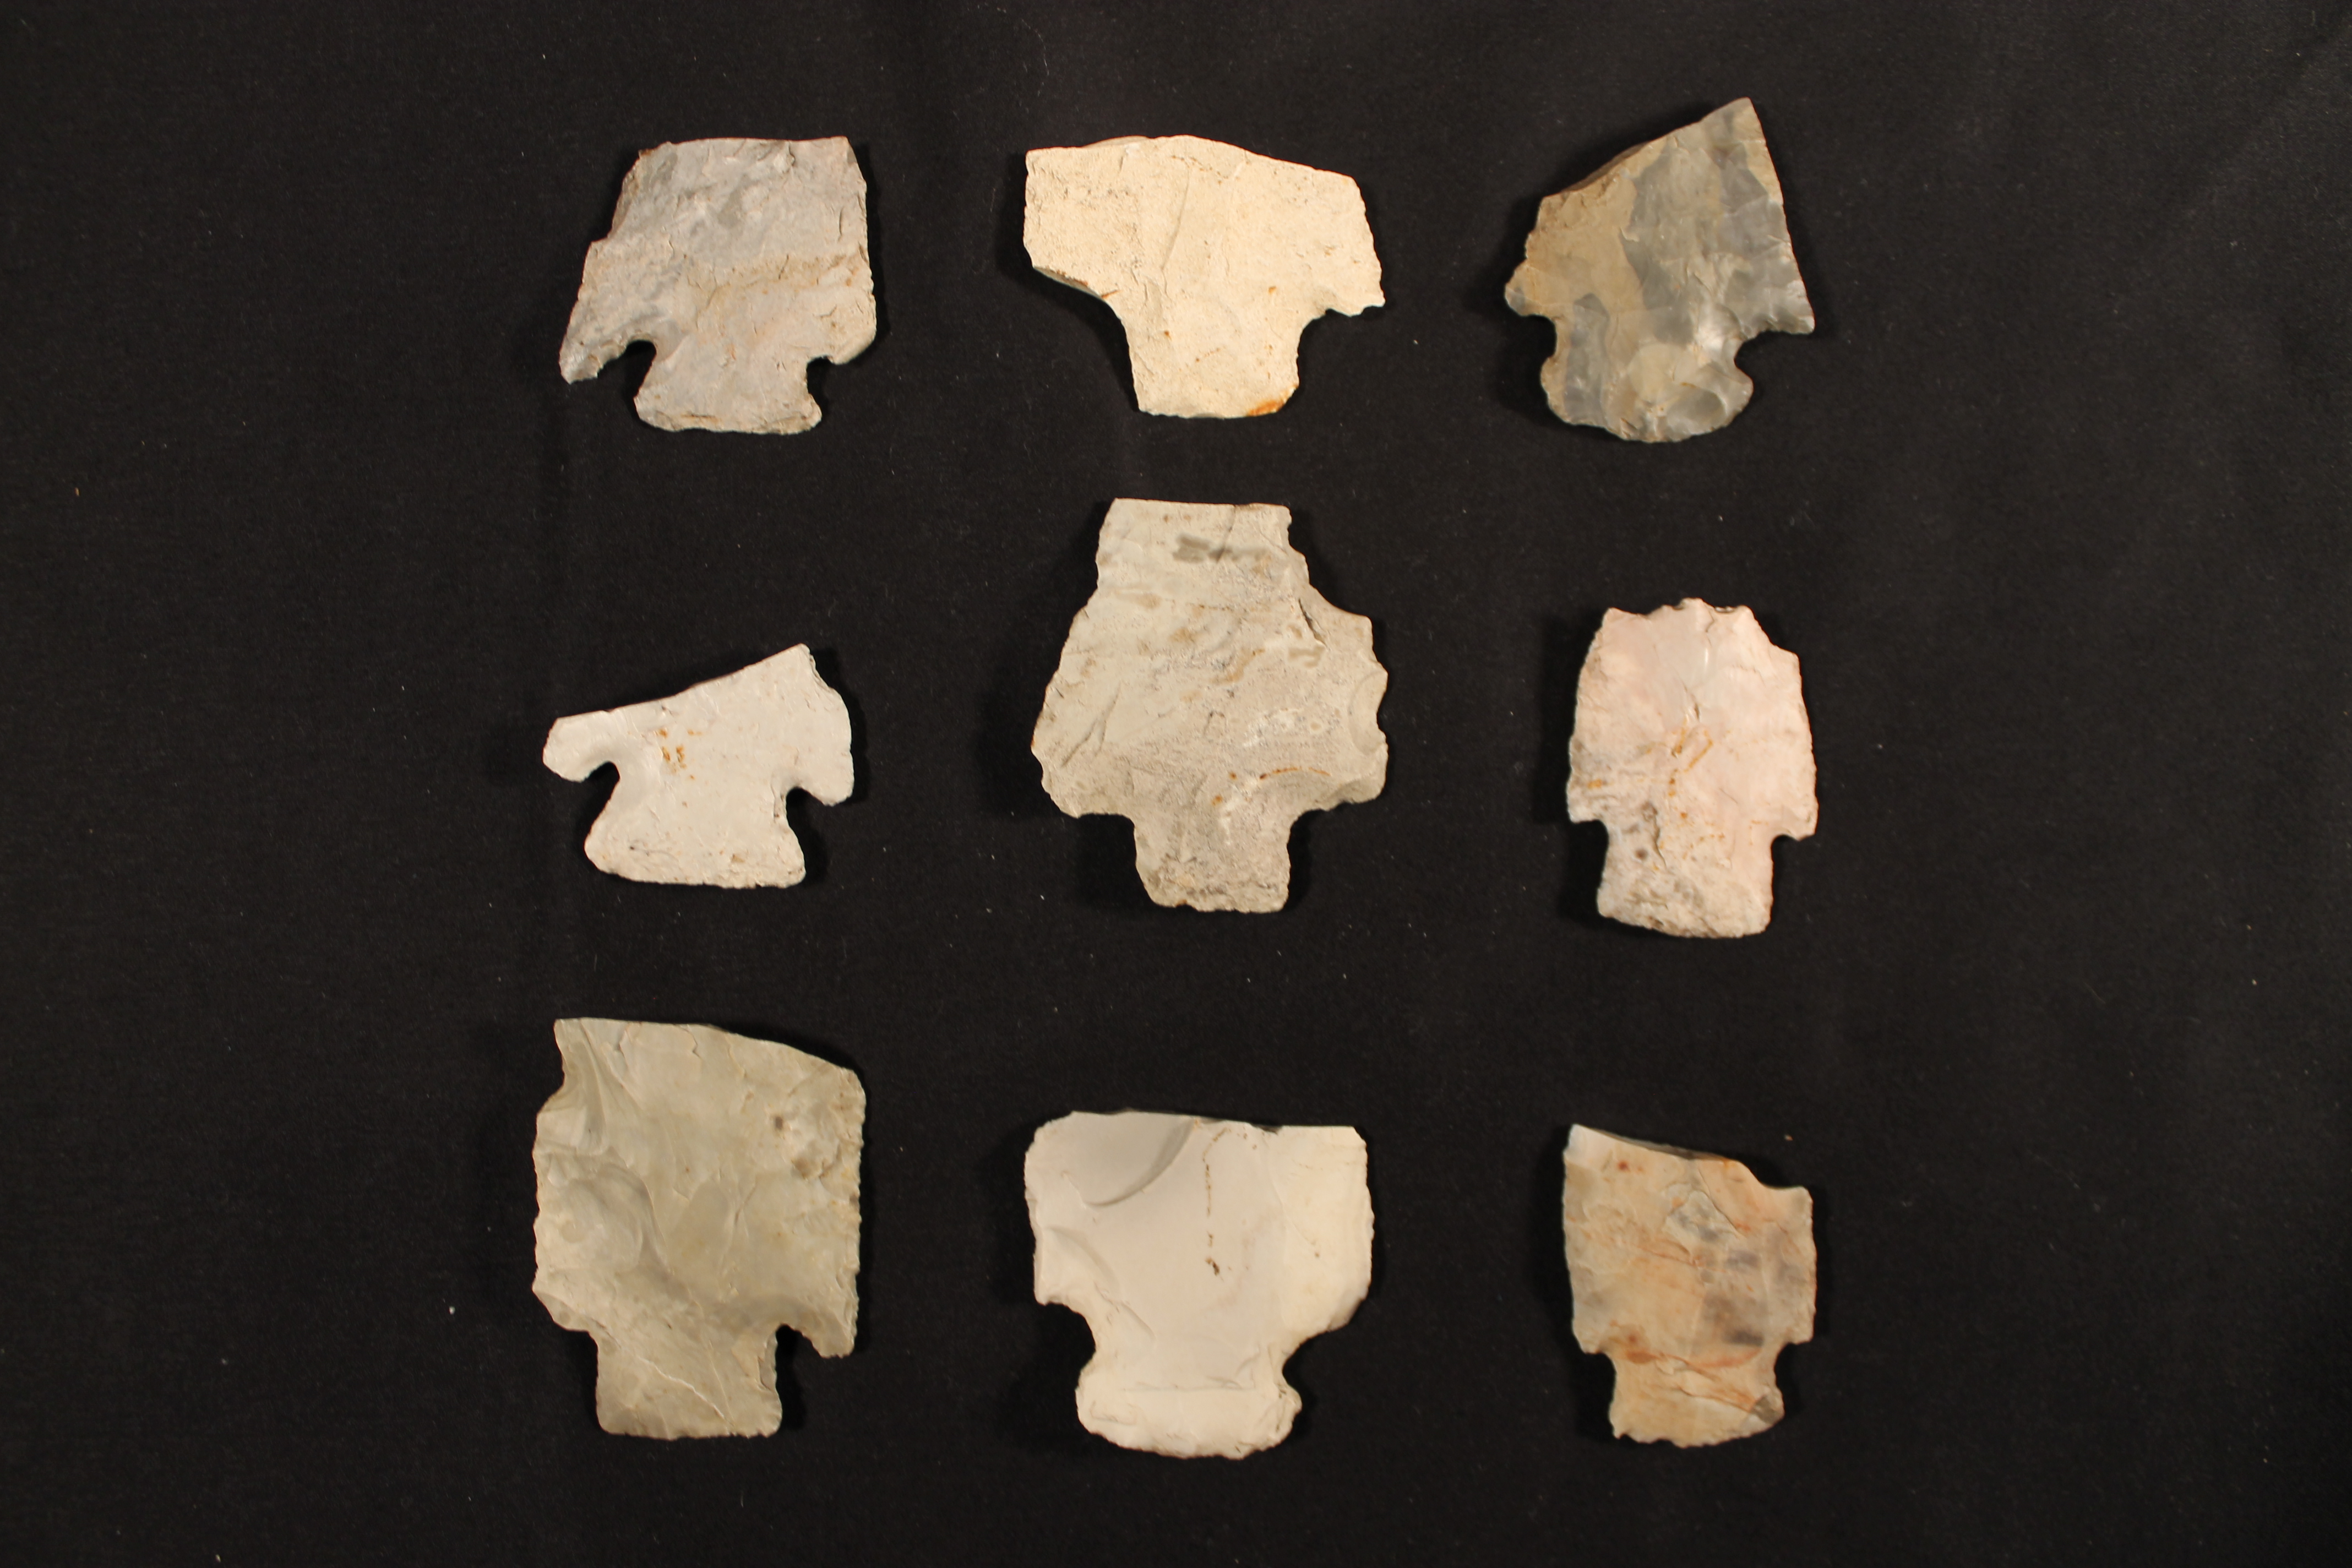 Nine arrowheads with notched sides at the bottom. All of their top points have been broken off.